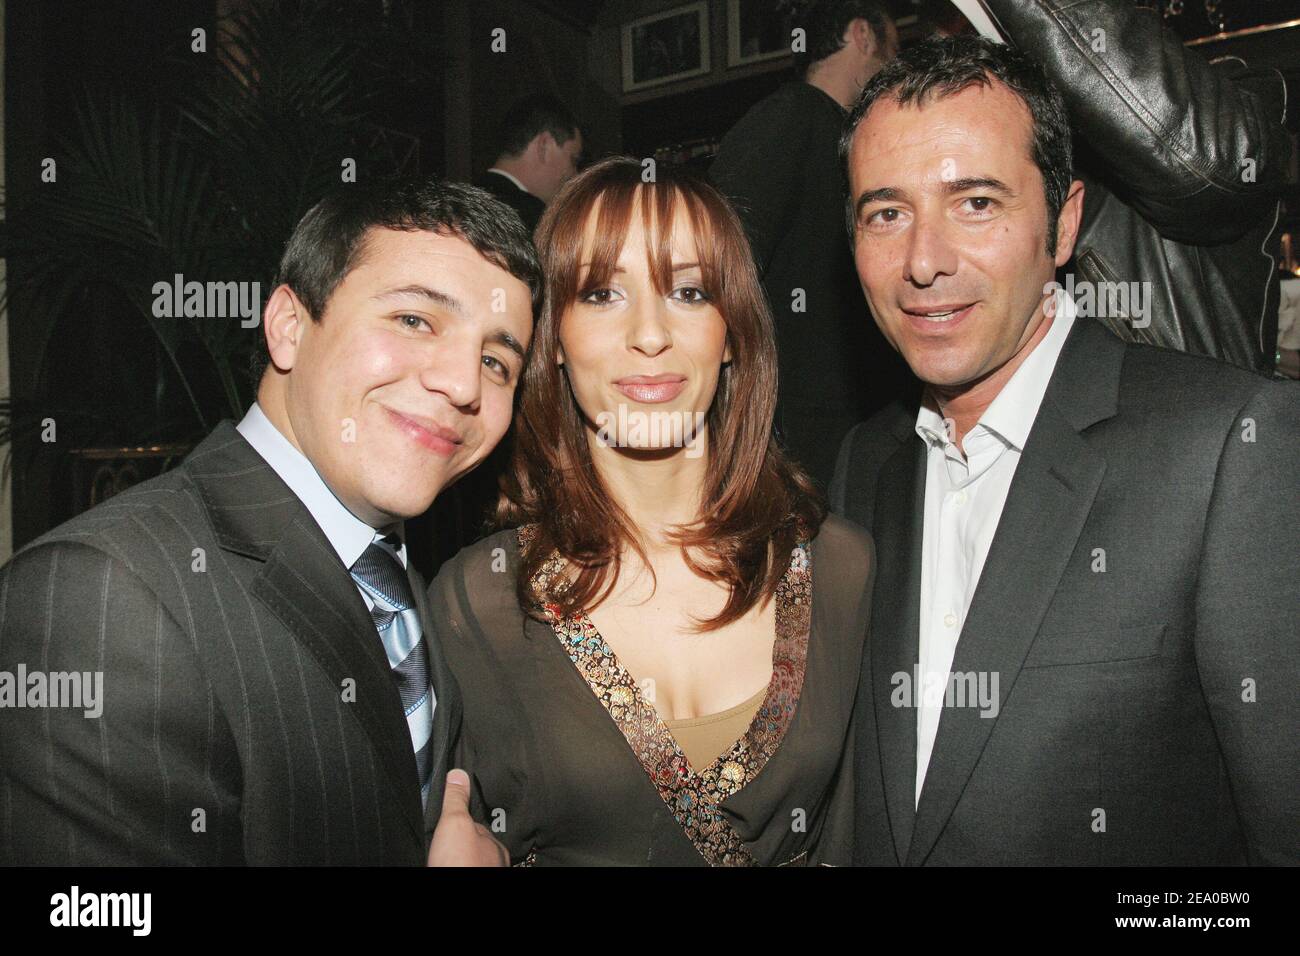 French rai singer Faudel (L), with his girlfriend Anissa, and French TV presenter Bernard Montiel pose at the giving ceremony of the '2005 Jean Gabin-Romy Schneider Prize' ceremony held at the Fouquet's in Paris, France, on March 21, 2005. Cecile de France received the 'Romy Schneider Prize' and Clovis Cornillac the 'Jean Gabin Prize'. Photo by Benoit Pinguet/ABACA. Stock Photo